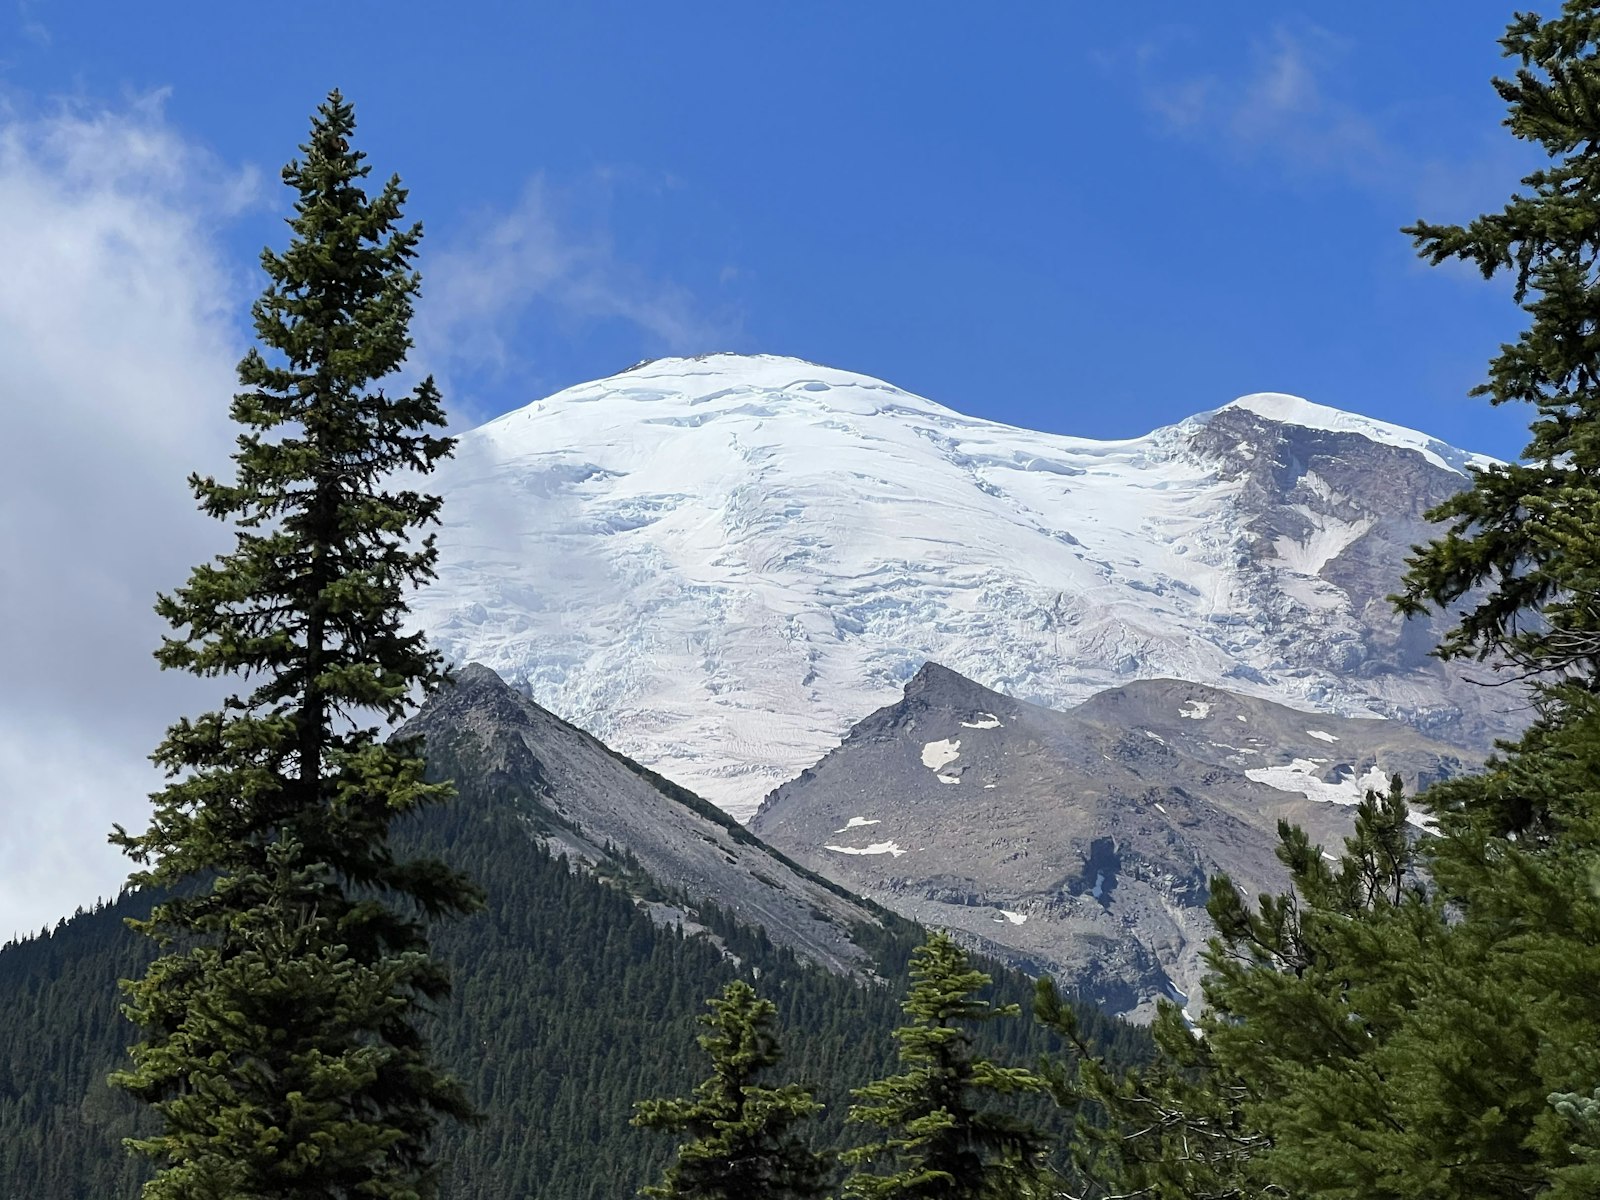 Large glacier on mountain with conifer trees in the foreground and blue skies